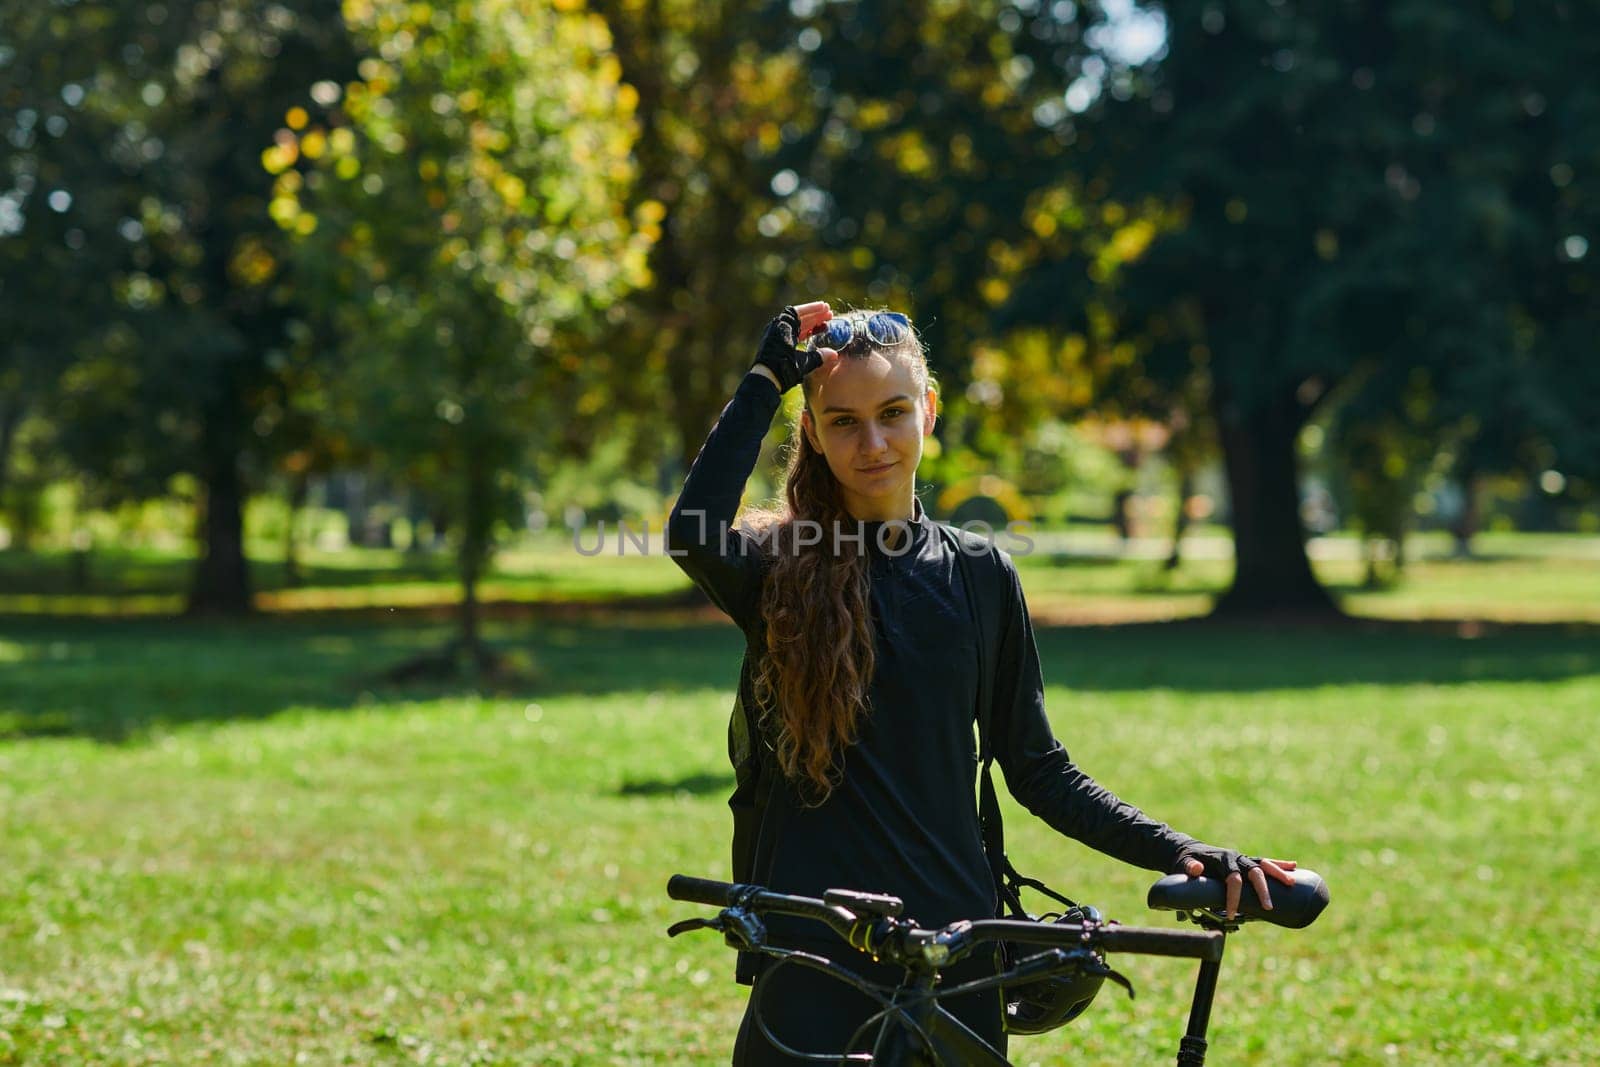 In the radiant embrace of a sunny day, a joyous girl, adorned in professional cycling gear, finds pure bliss and vitality as she cruises through the park on her bicycle, her infectious laughter echoing the carefree harmony of the moment by dotshock